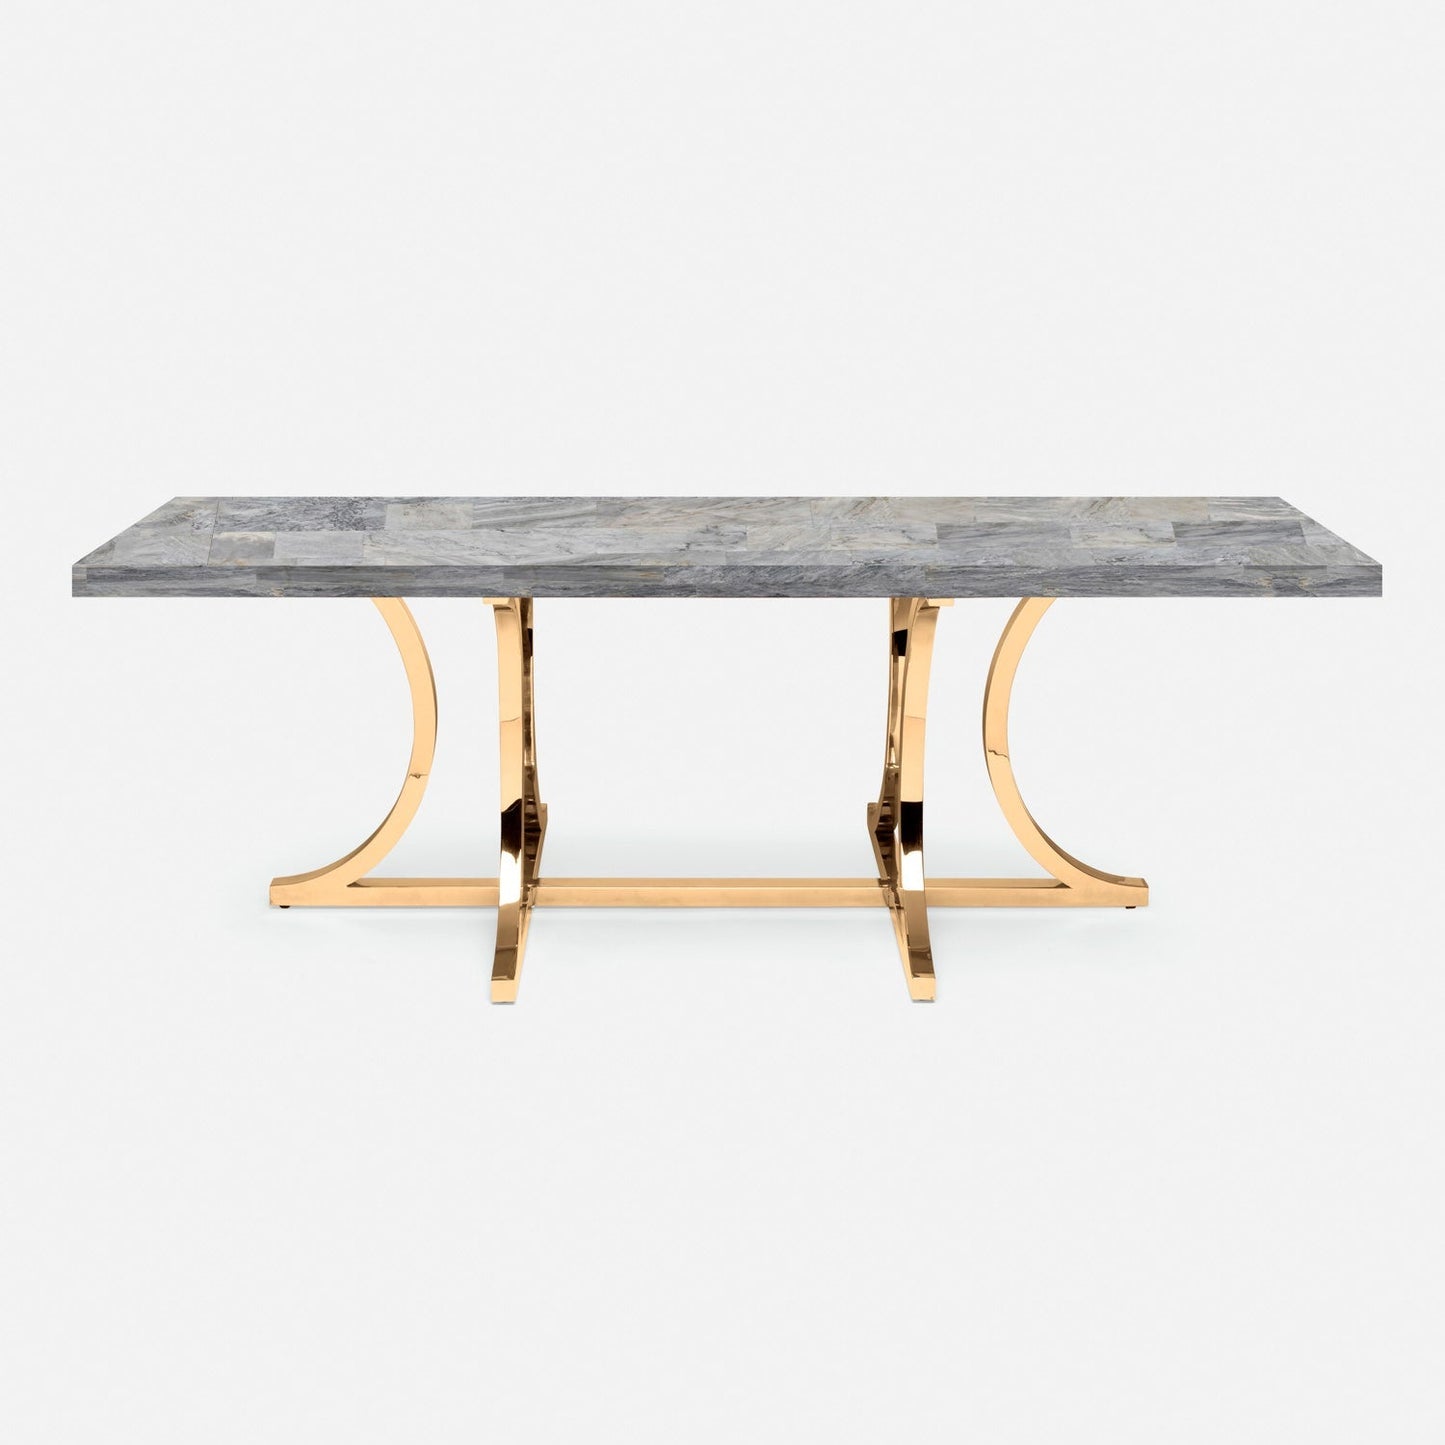 Made Goods Leighton 88" x 40" x 30" Polished Brass Steel Dinning Table With Rectangle Gray Romblon Stone Table Top